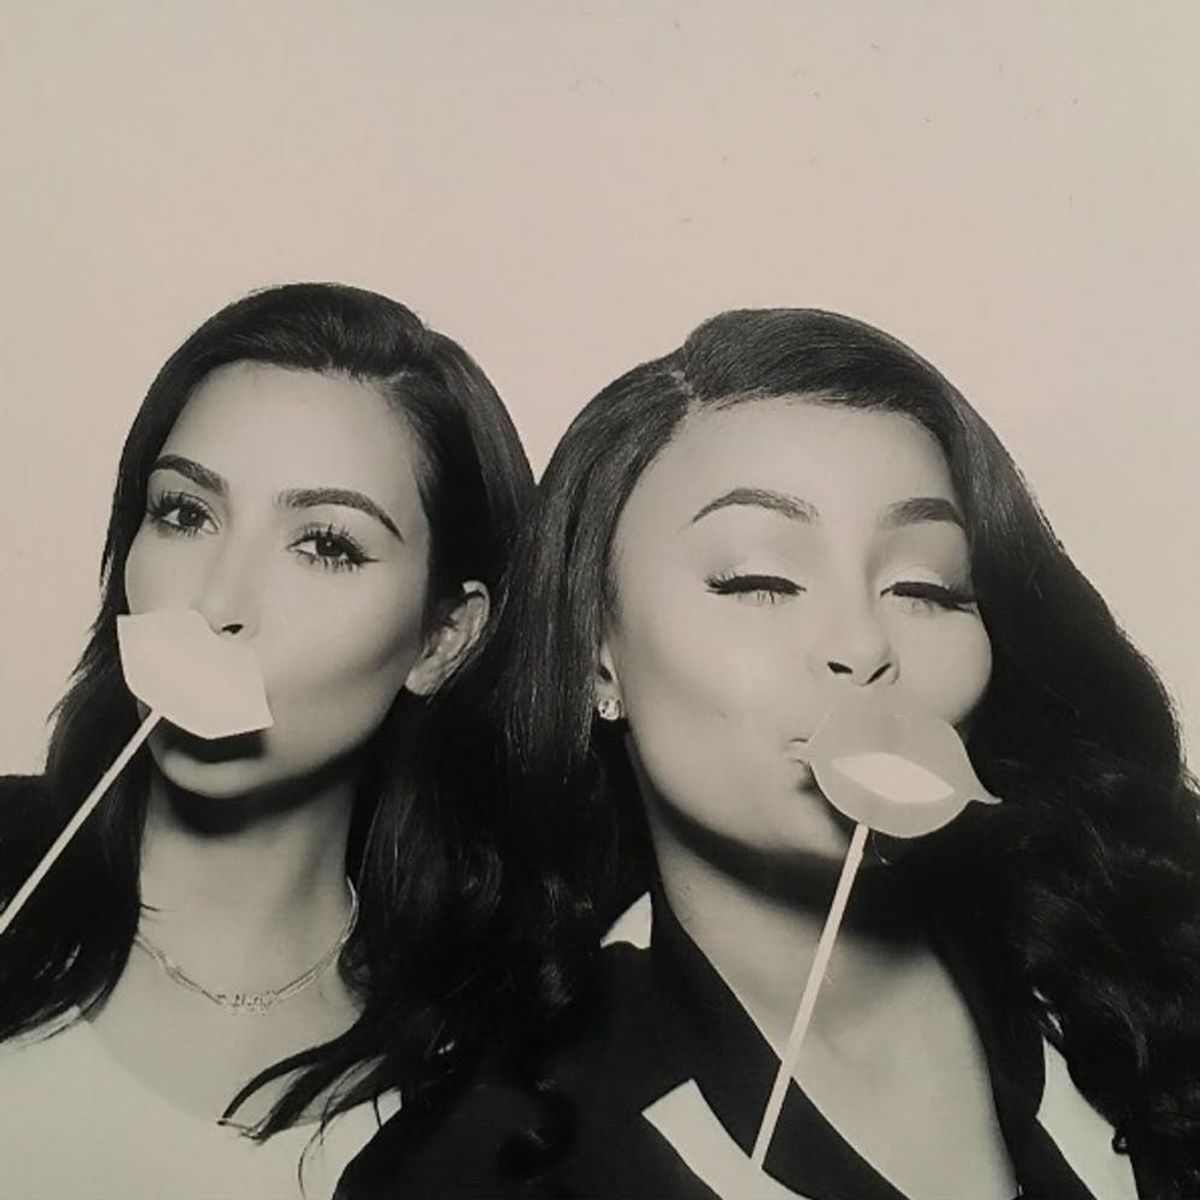 Find Out What Kim Kardashian Told Blac Chyna During Their Heart-to-Heart